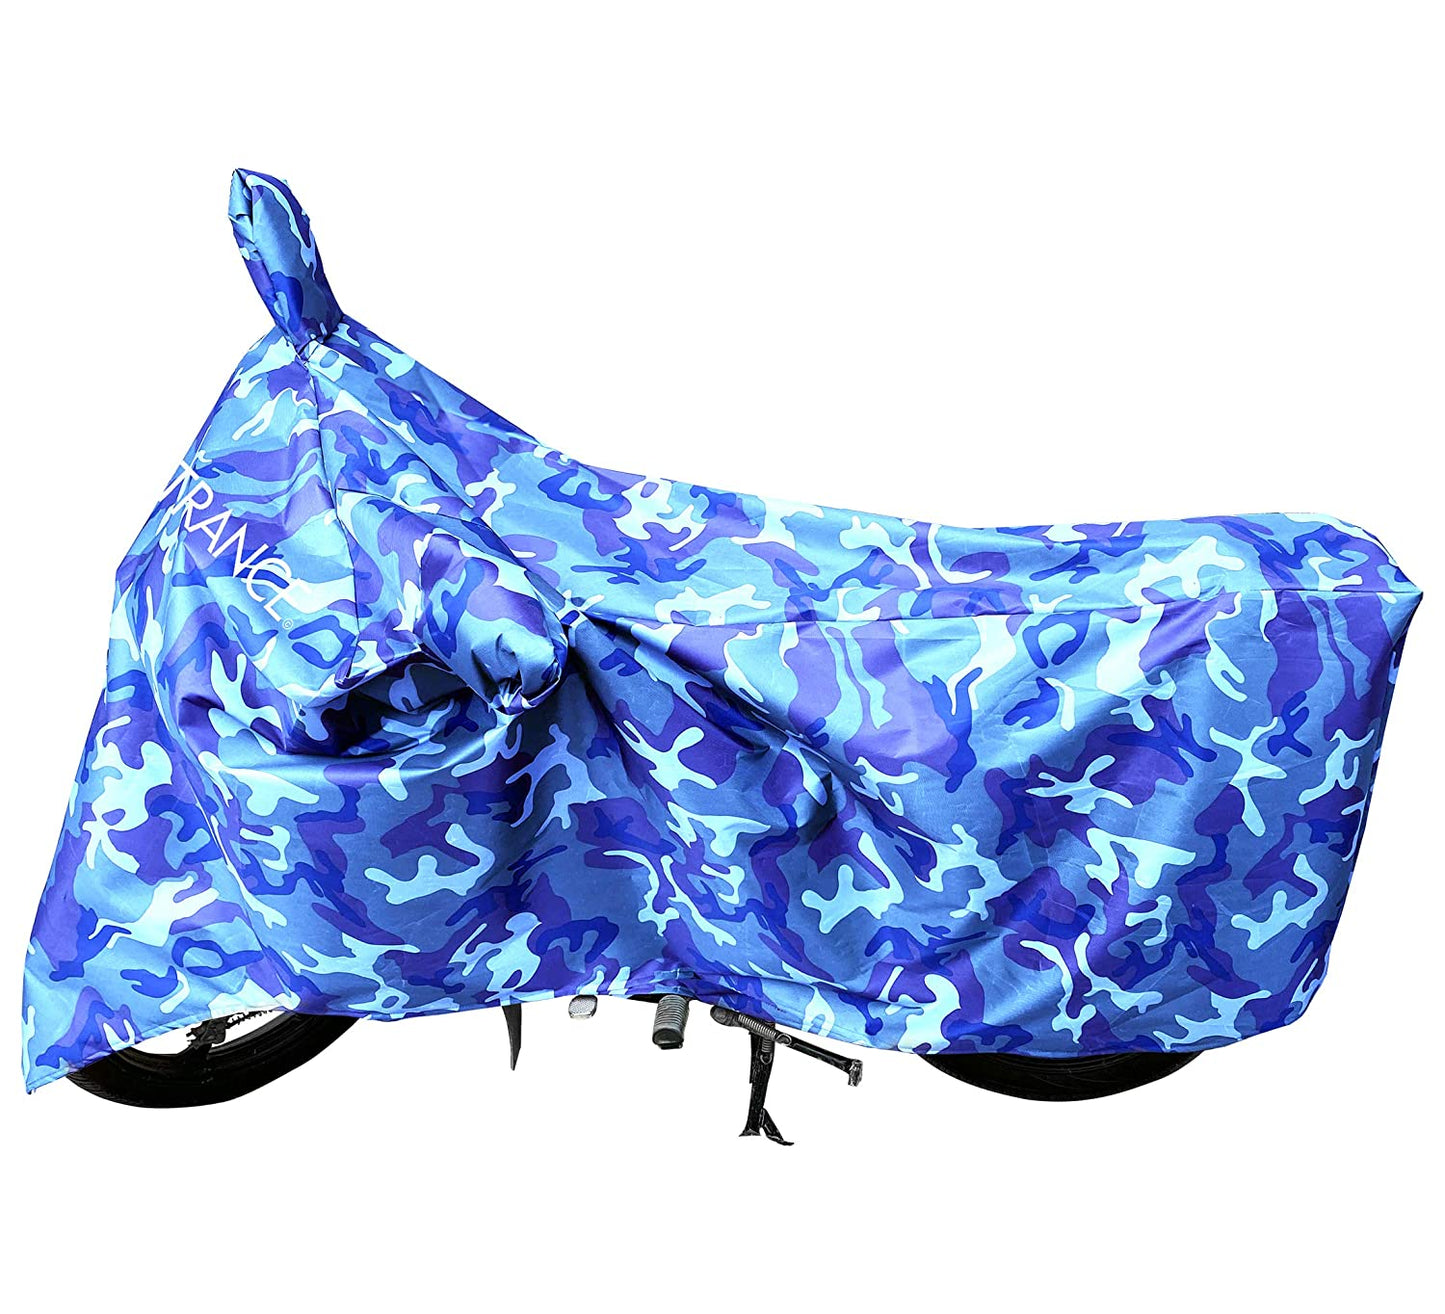 MotoTrance Jungle Bike Body Covers For Kawasaki KLX 110 - Interlock-Stitched Waterproof and Heat Resistant with Mirror Pockets